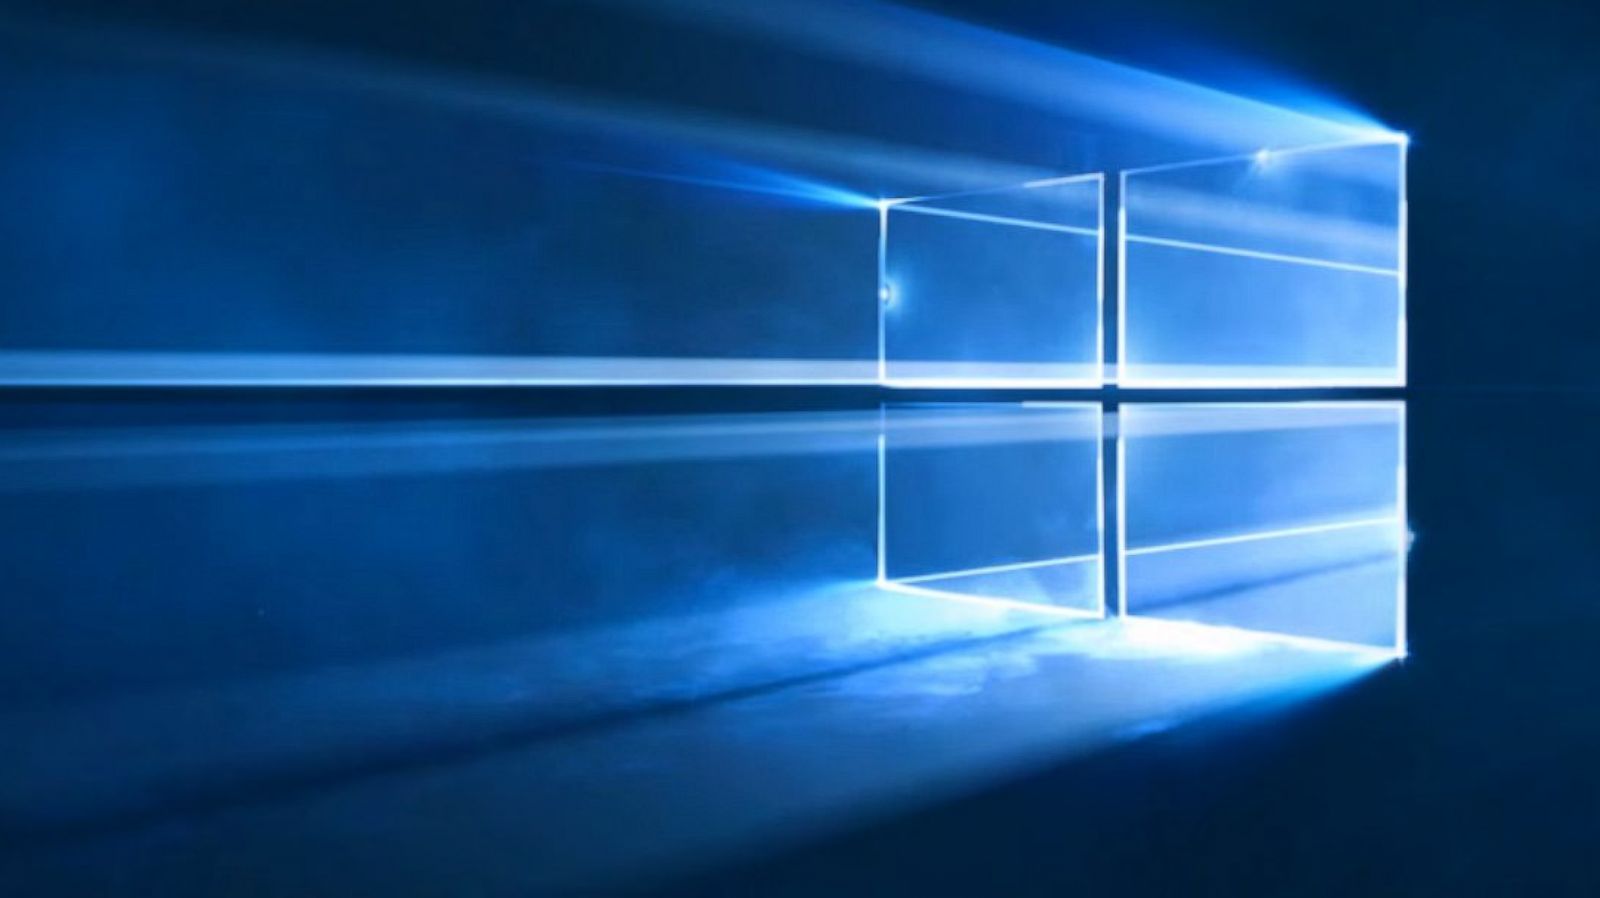 Windows 10: Lasers, Smoke Machines and Falling Crystals Help Make New Wallpaper